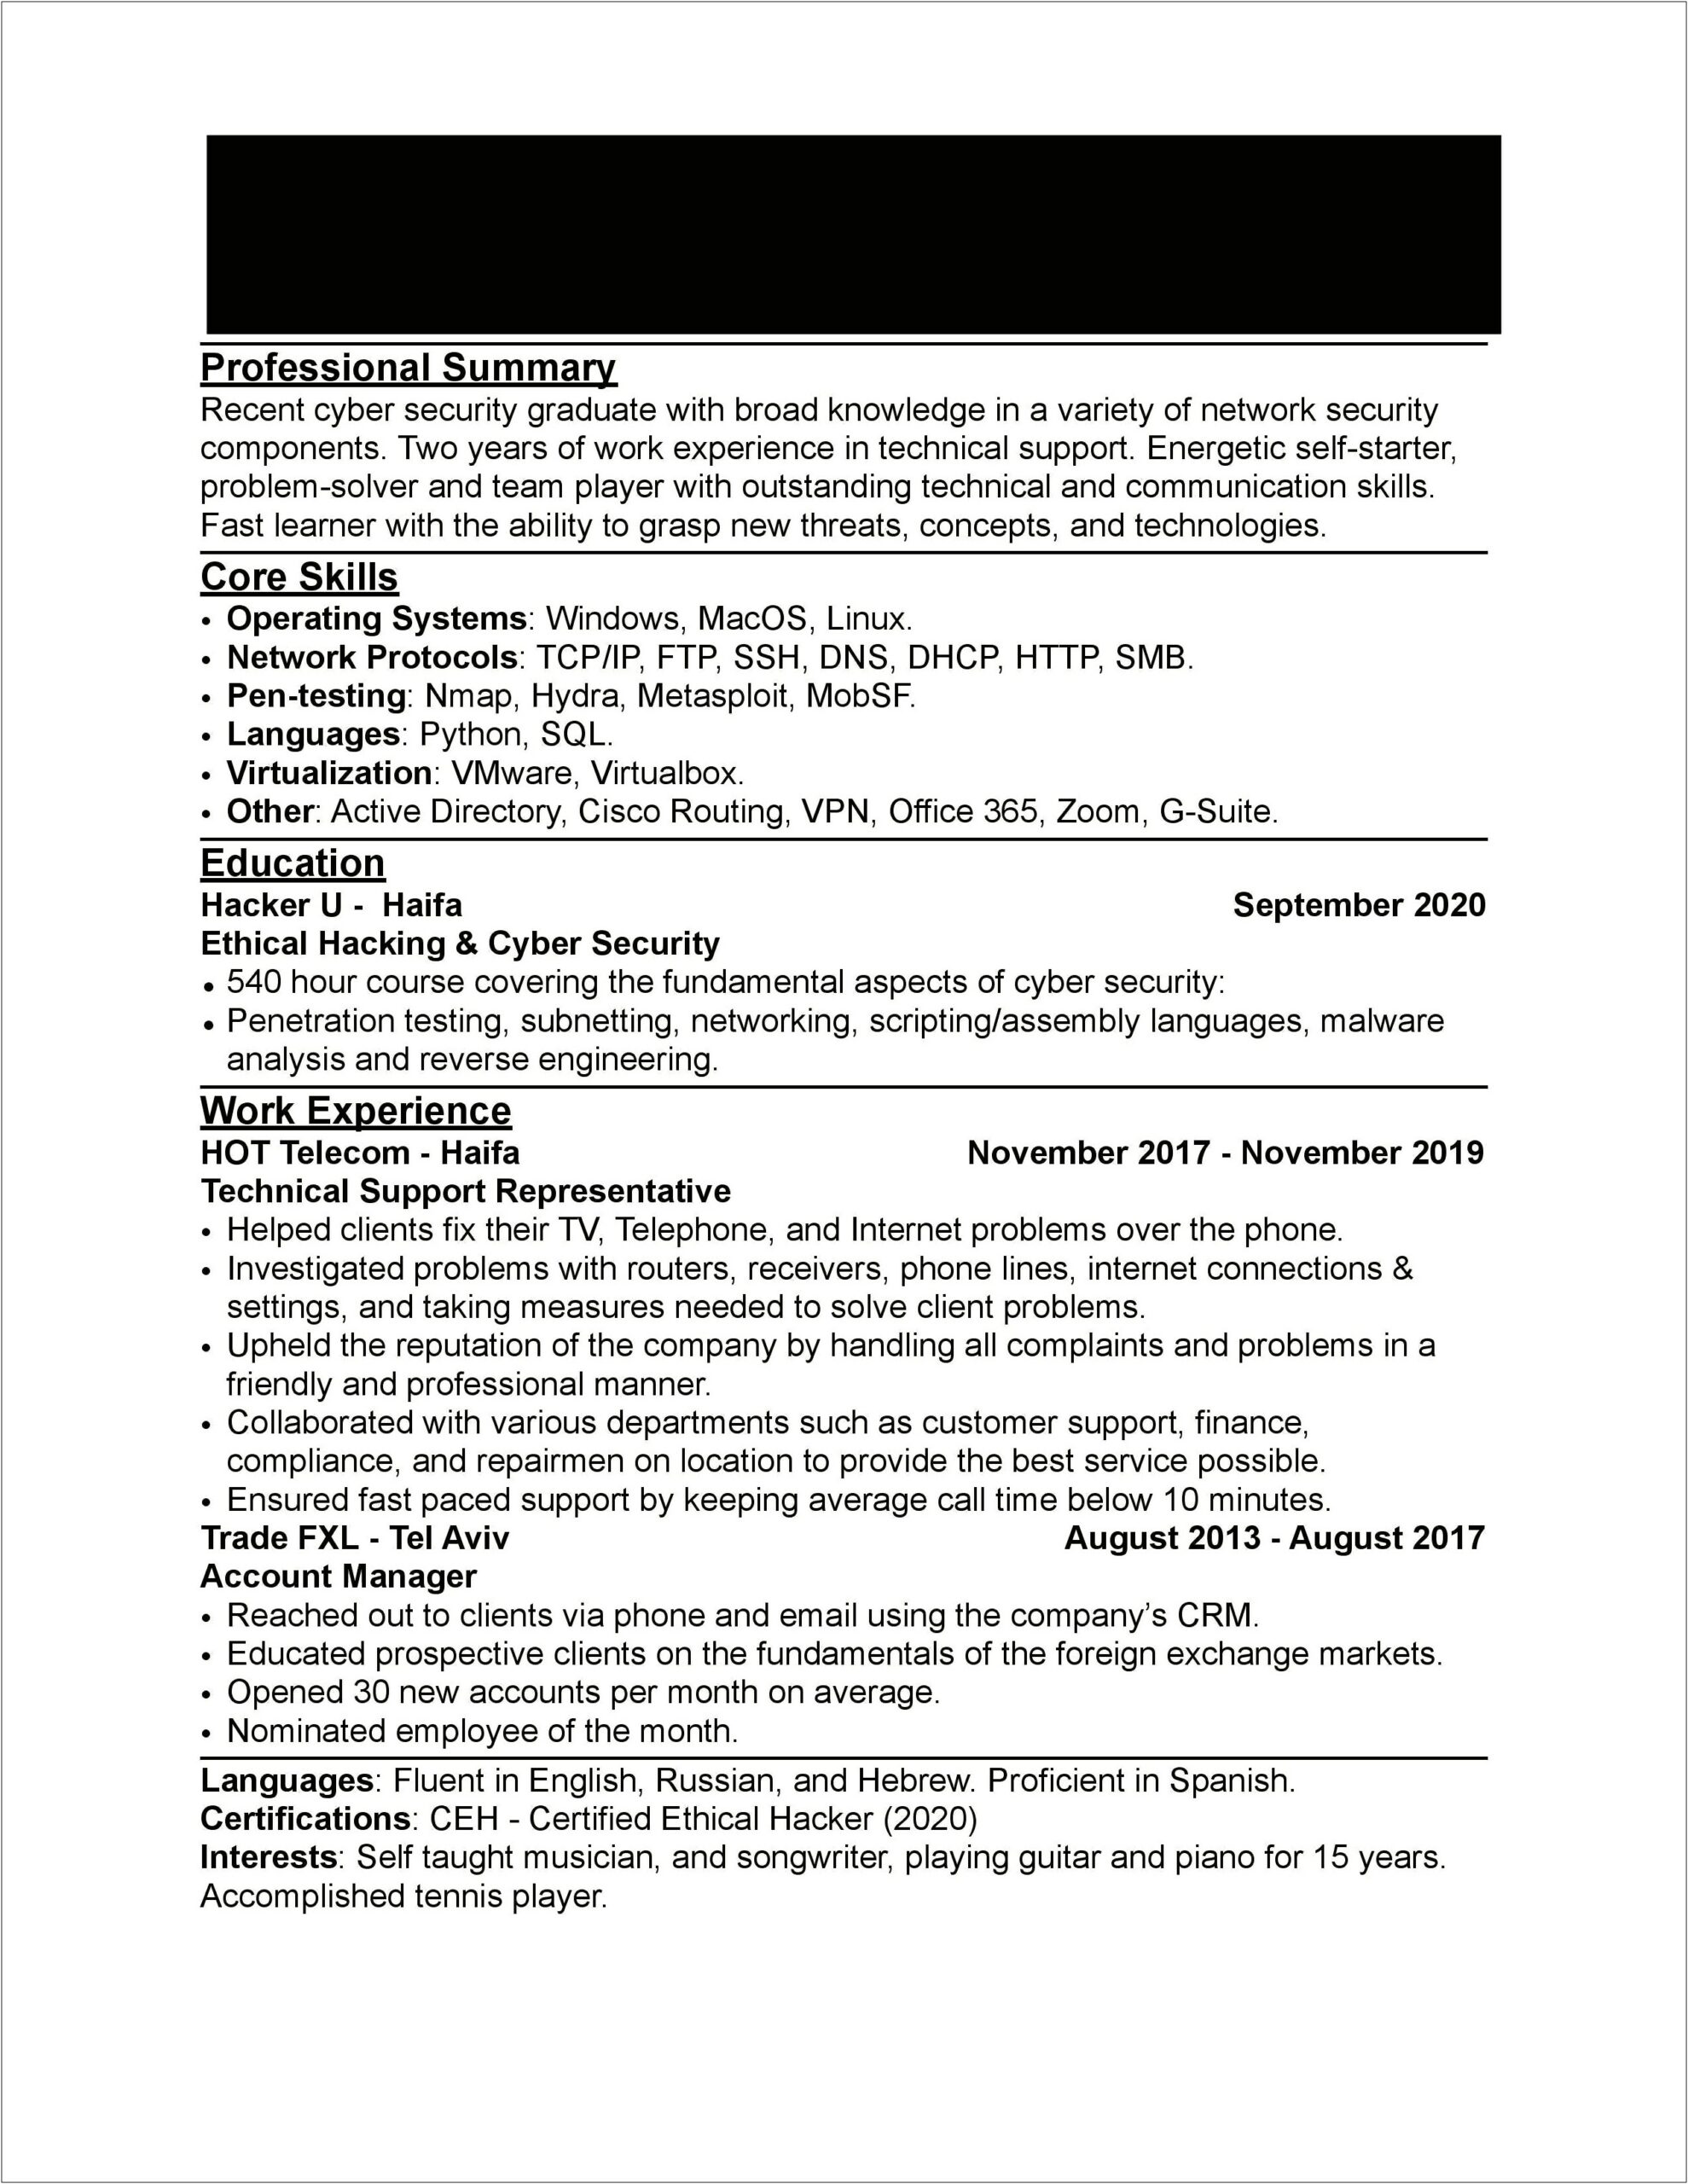 Cyber Security Graduate Resume No Experience